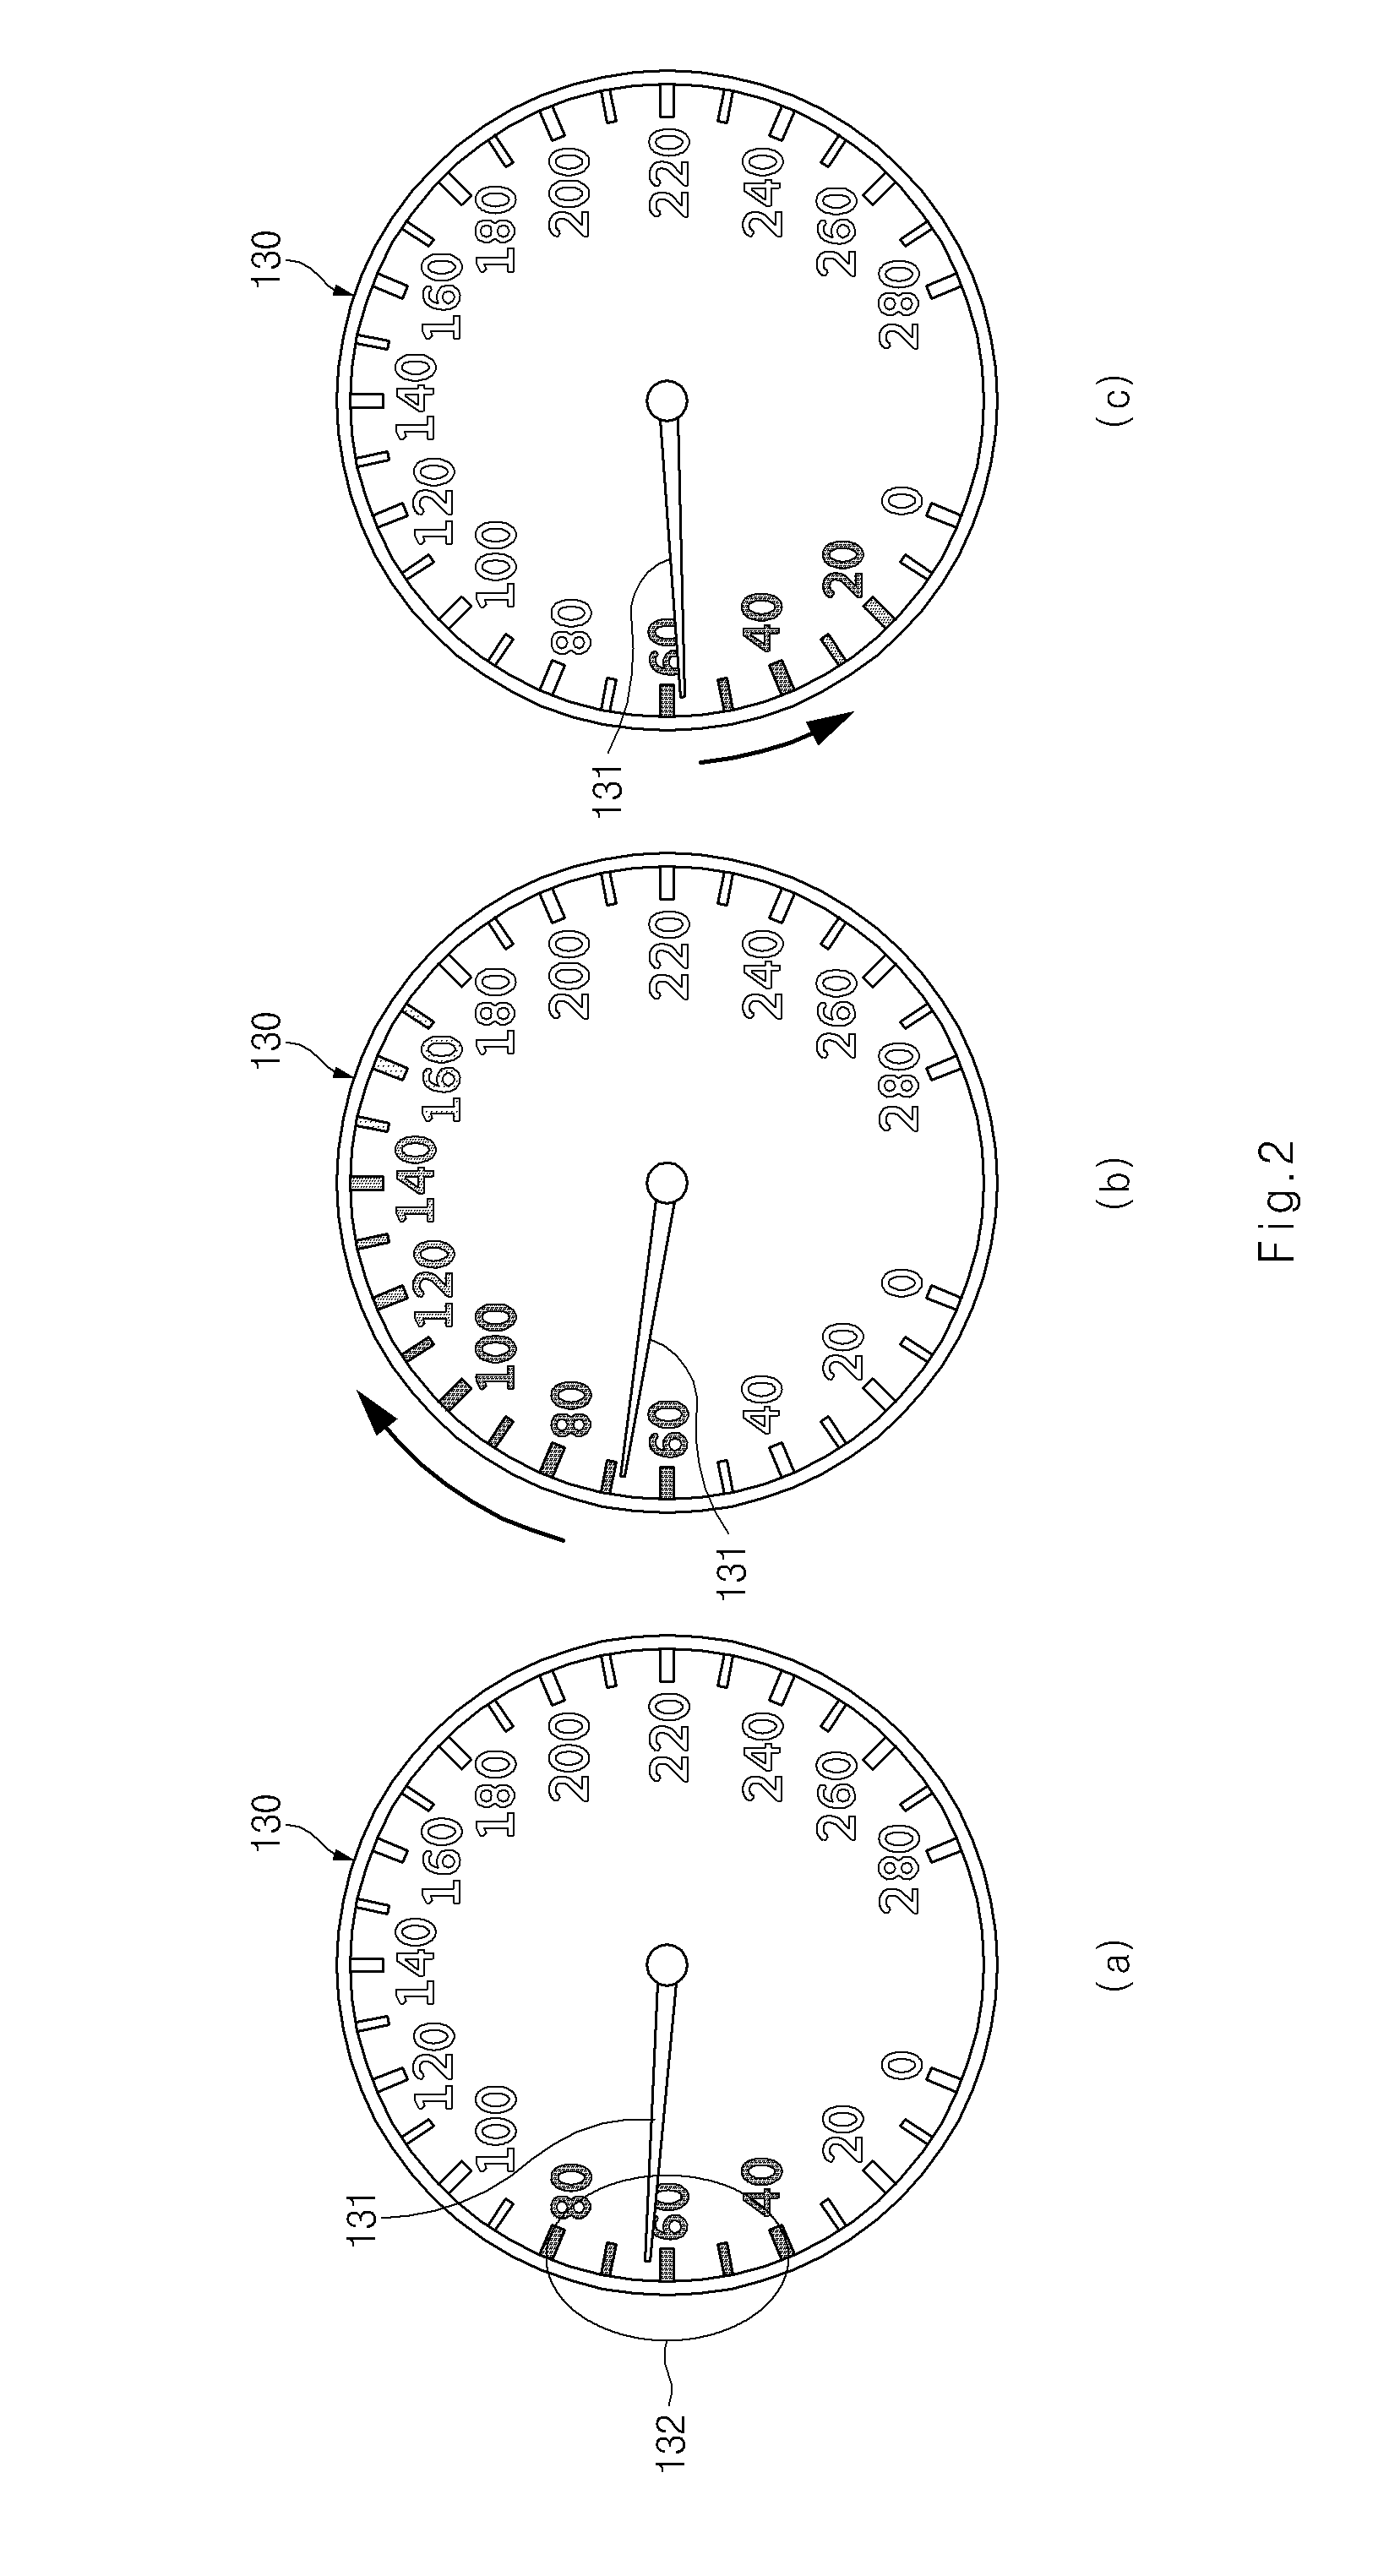 Apparatus and method for displaying cluster